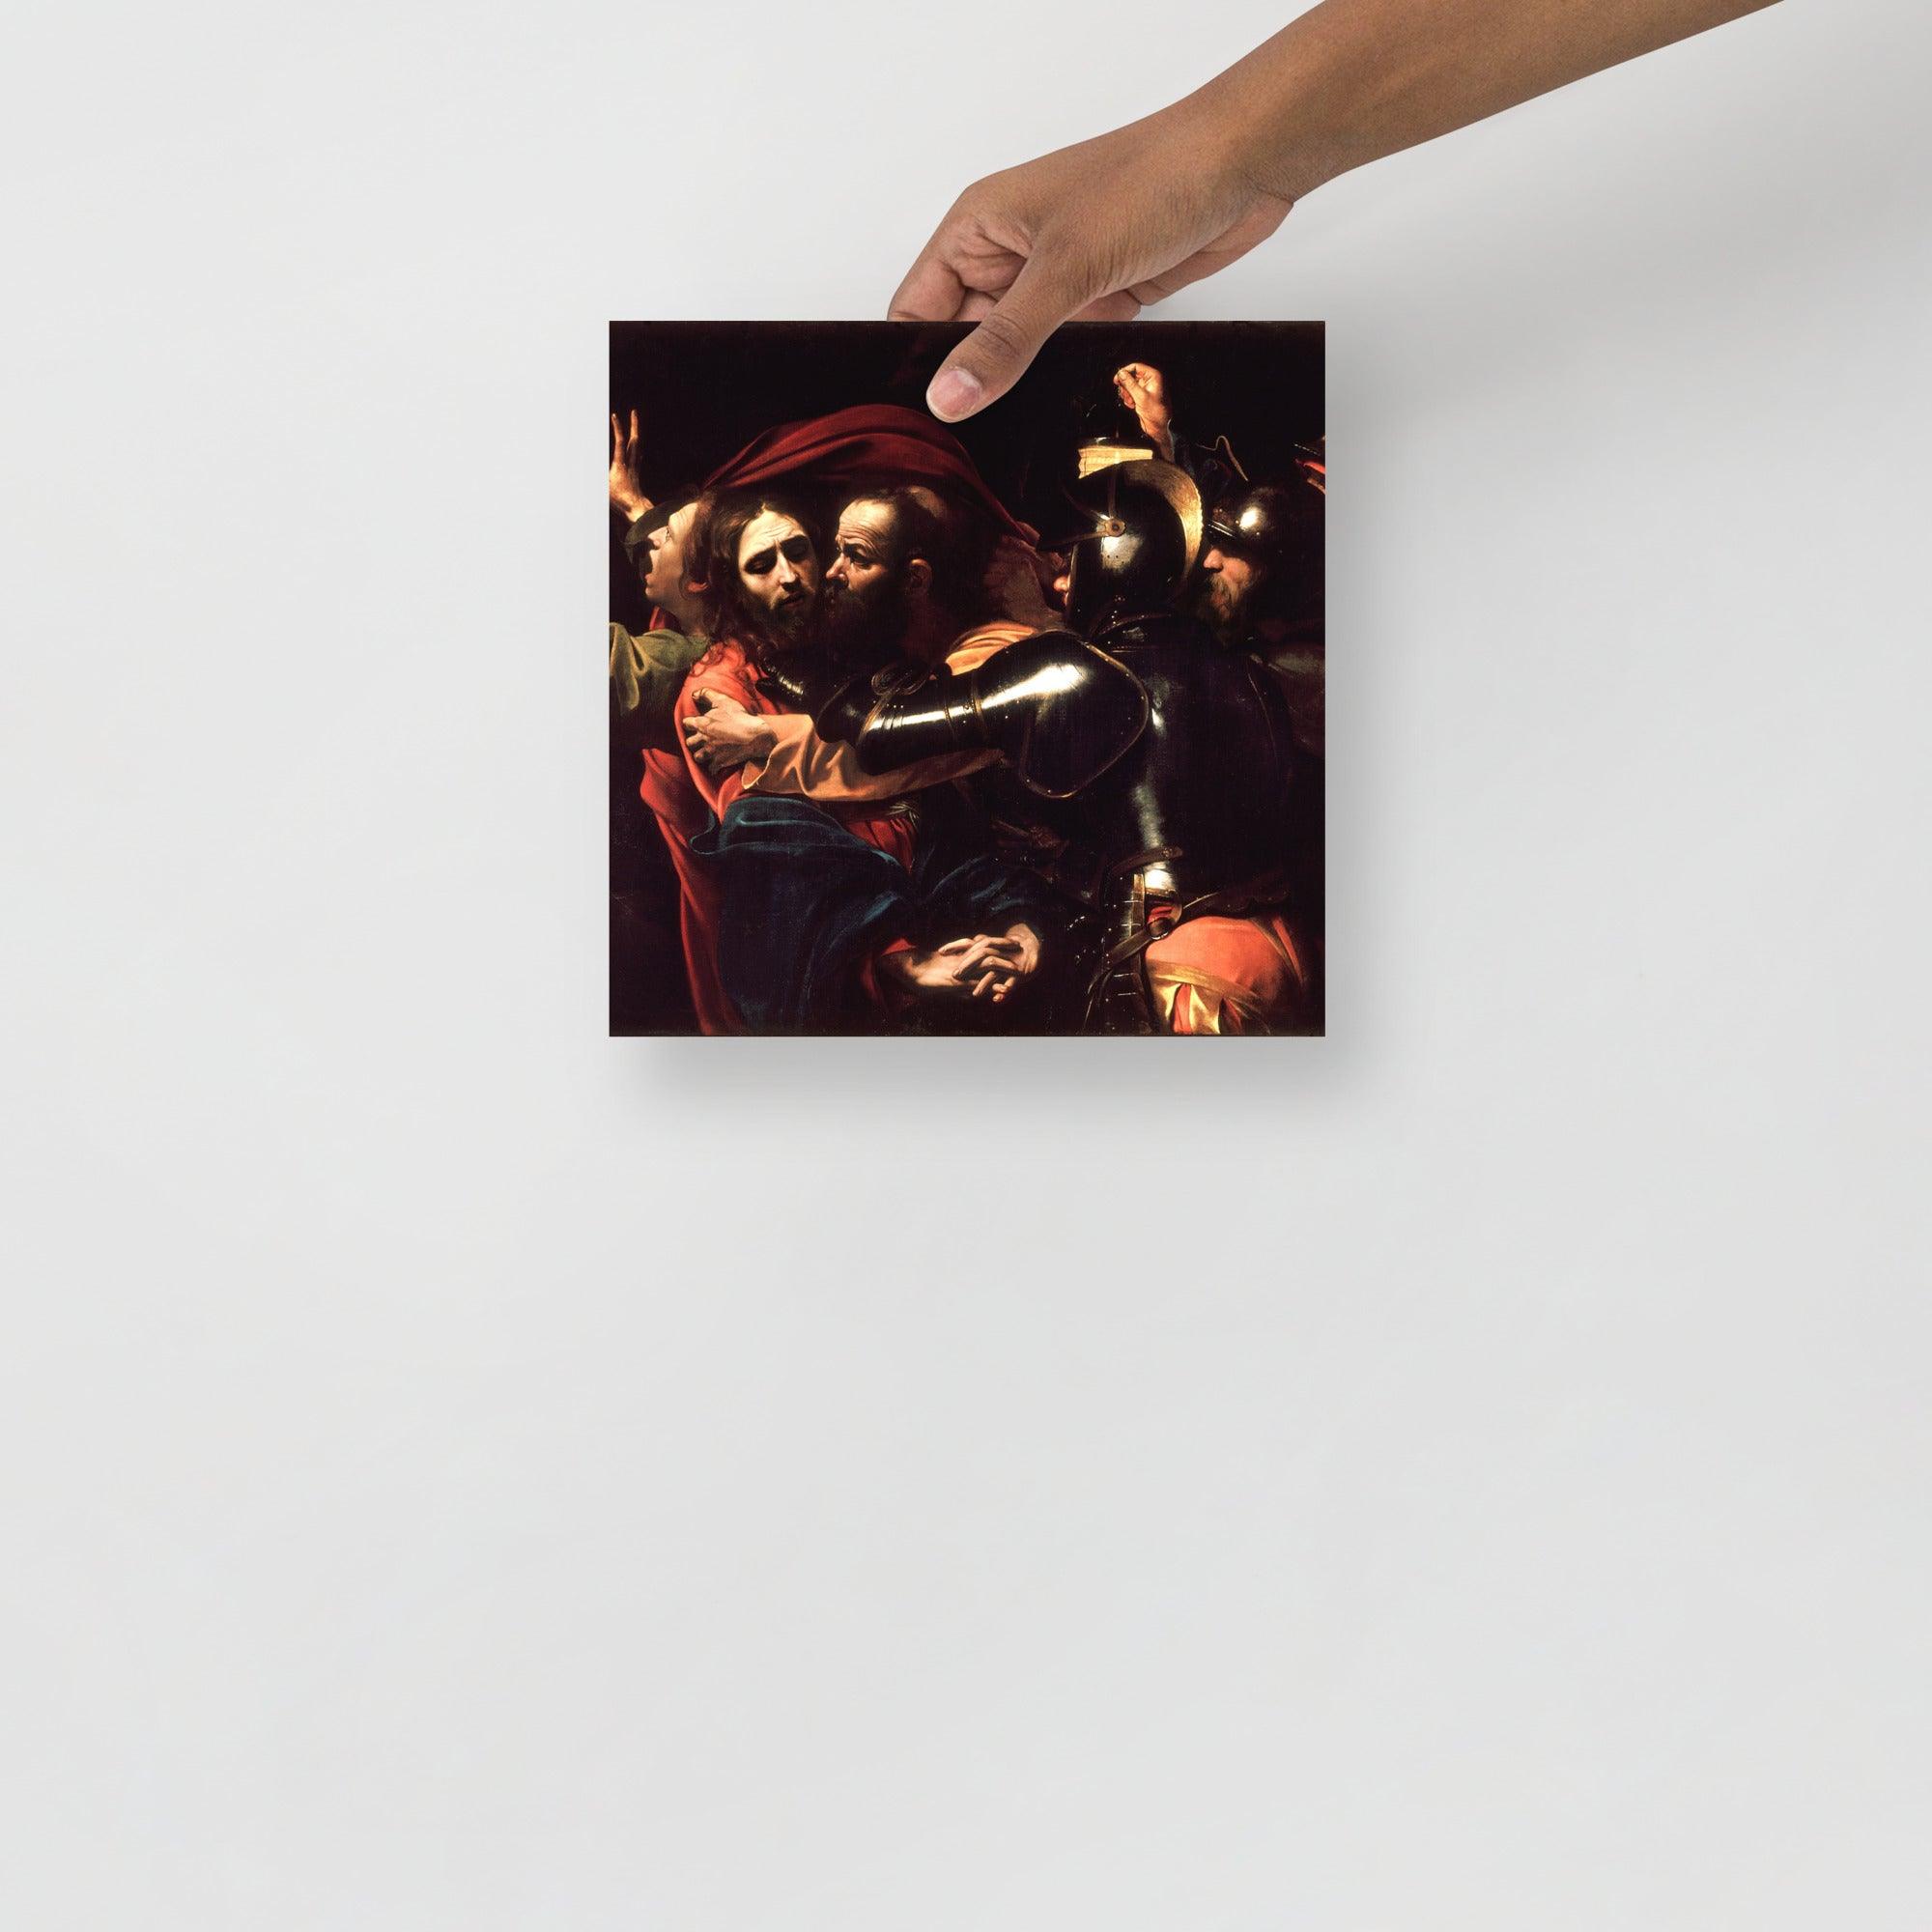 The Taking of Christ by Caravaggio poster on a plain backdrop in size 10x10”.